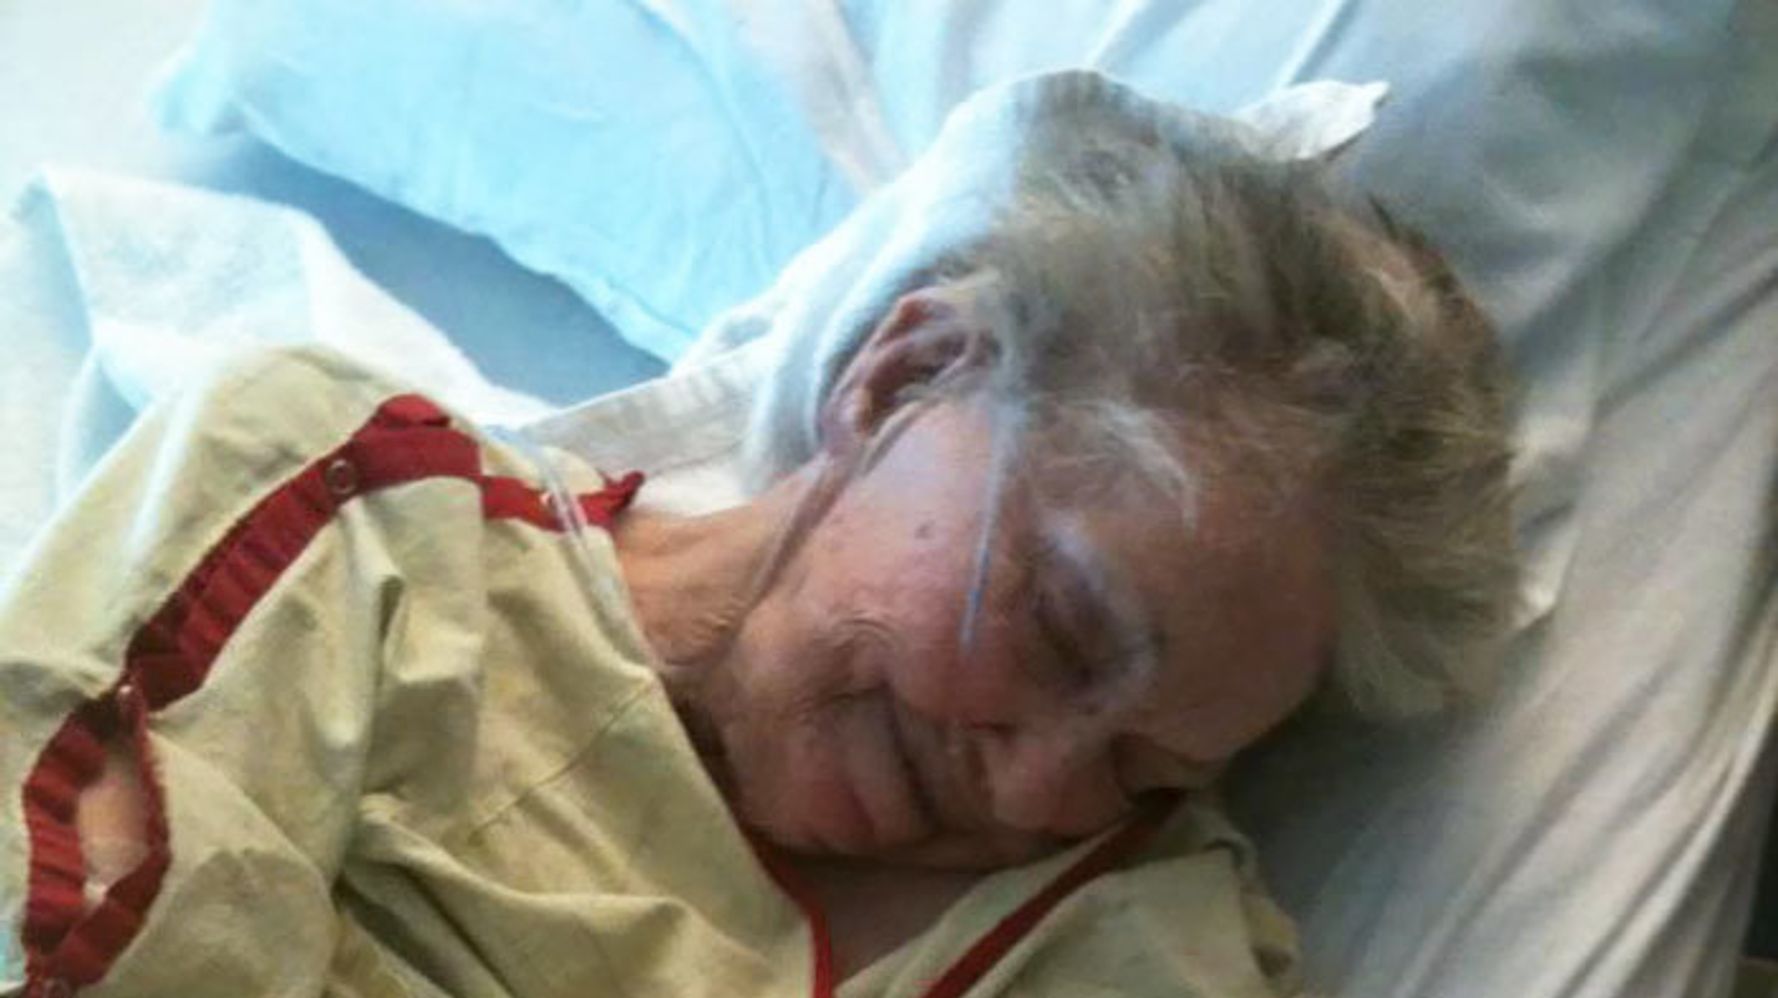 One Last Goodbye Elderly Woman S Dying Wish To Cuddle Her Cat In Hospital Is Granted